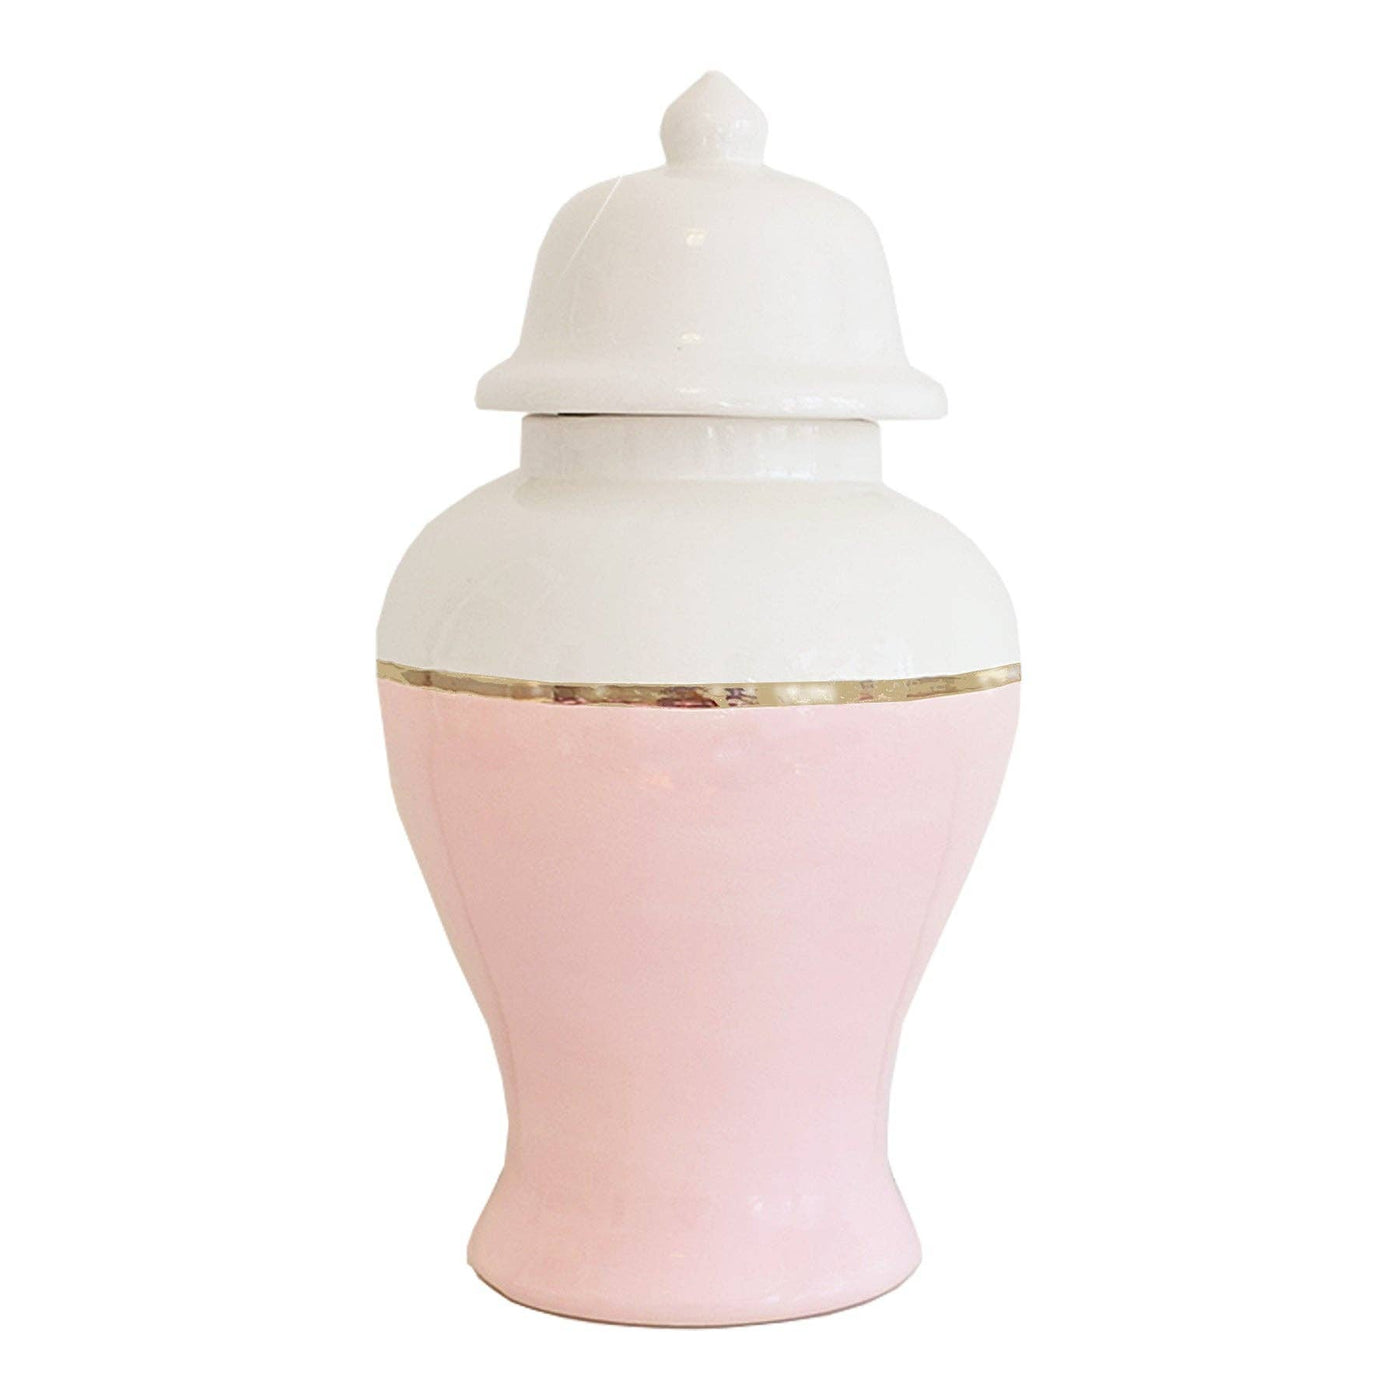 Lo Home by Lauren Haskell Designs - Cherry Blossom Pink Color Block Ginger Jar with Gold Accent